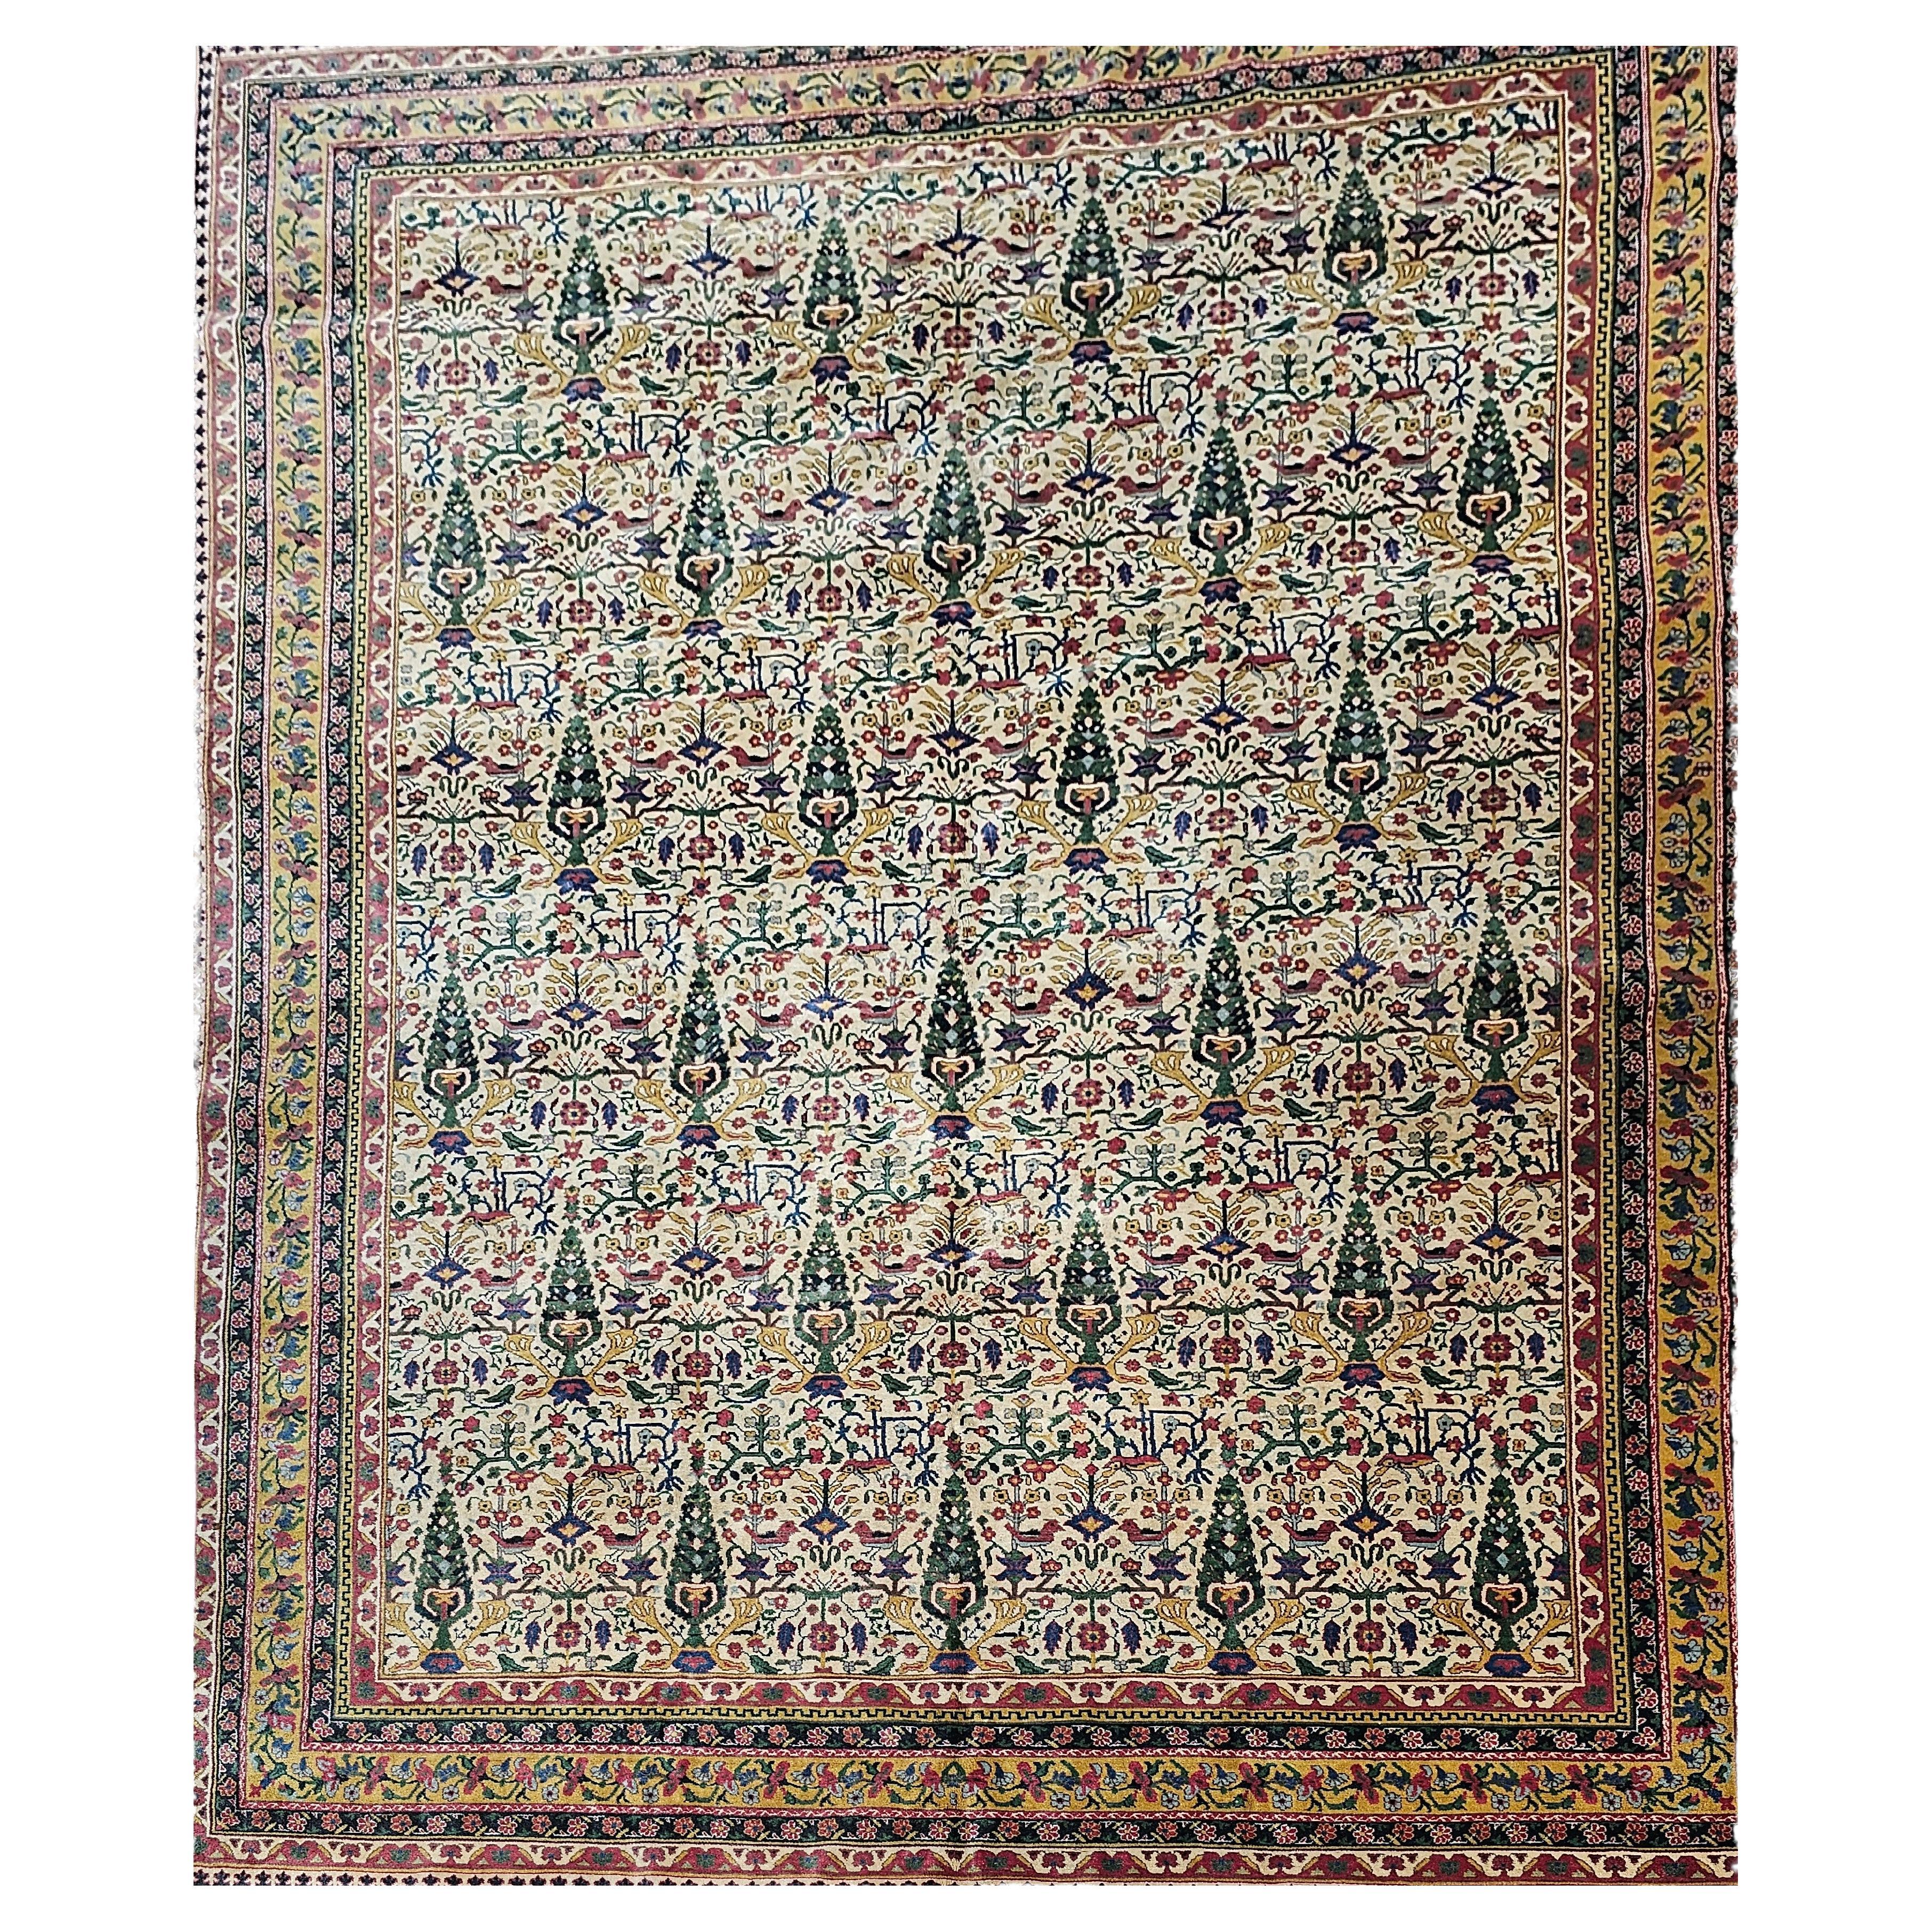 Vintage Indian Agra Room Size Rug in Garden Pattern in Green, Yellow, Pink, Red